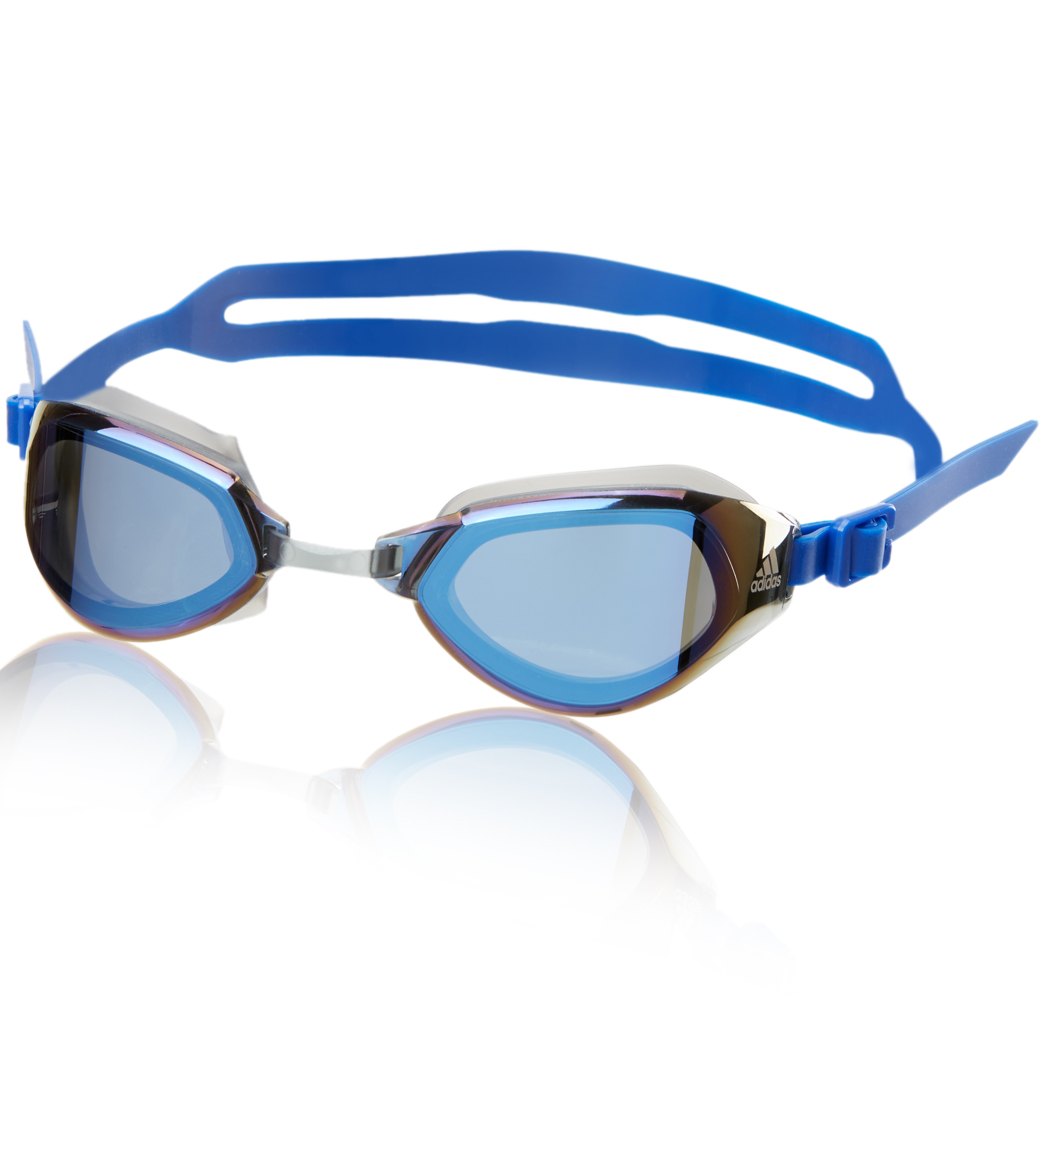 Adidas Persistar Fit Mirrored Goggle at SwimOutlet.com